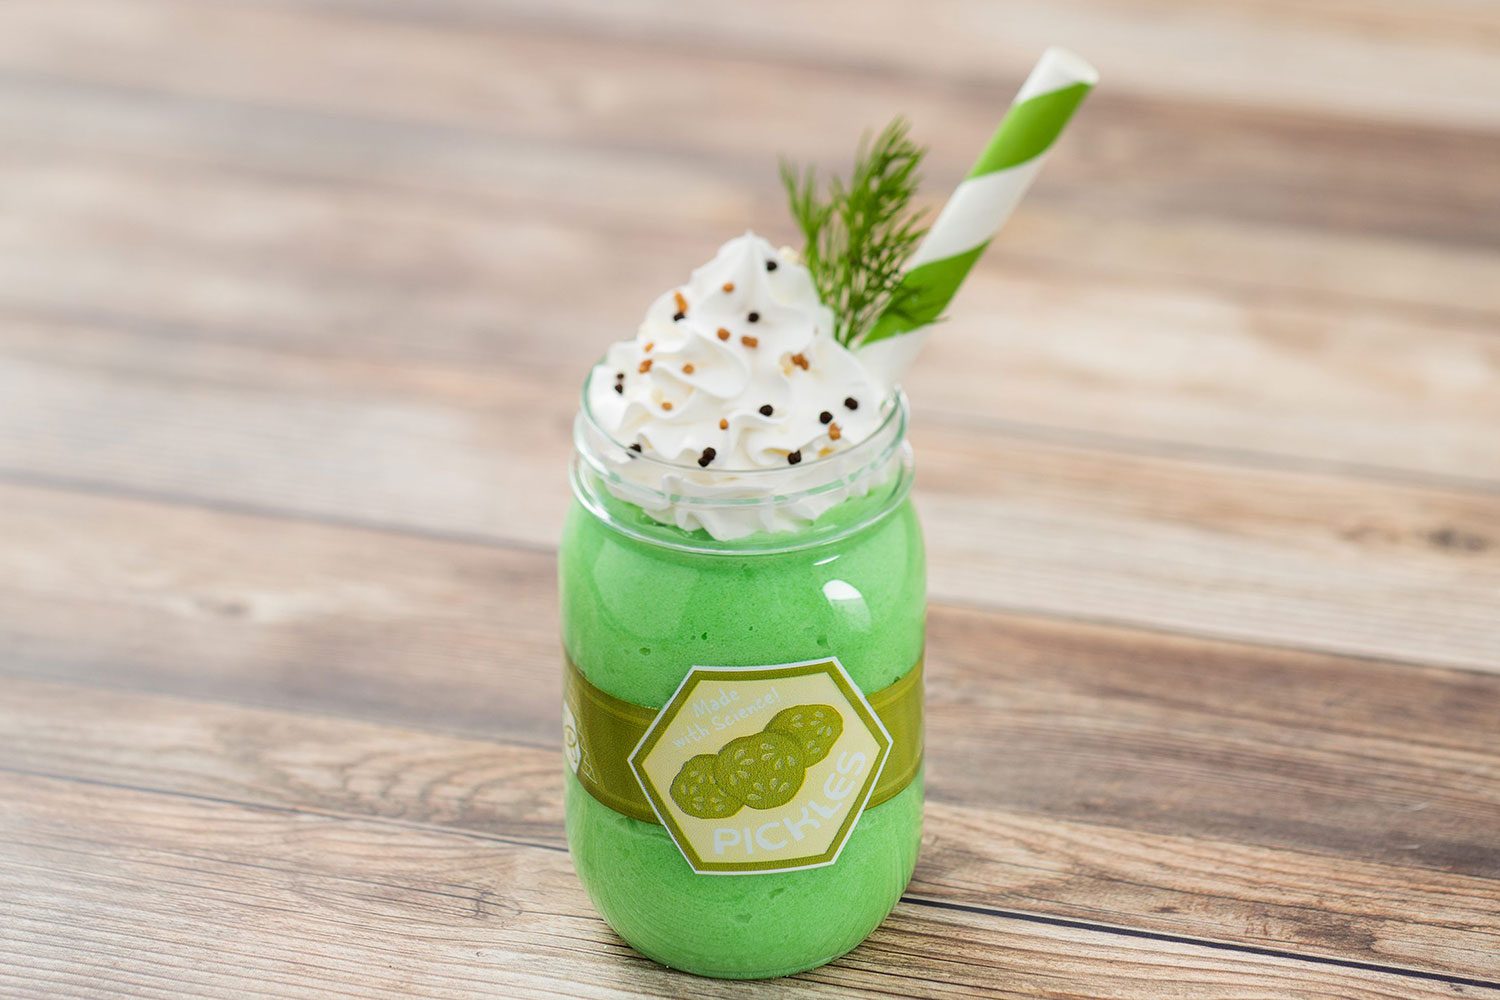 Guests can sip and savor from nearly 30 Global Marketplaces throughout the event, which celebrates delicious diversity in global food and drink, including the Pickle Milkshake at Brew-Wing Lab at the Odyssey at The 2023 Epcot International Food & Wine Festival